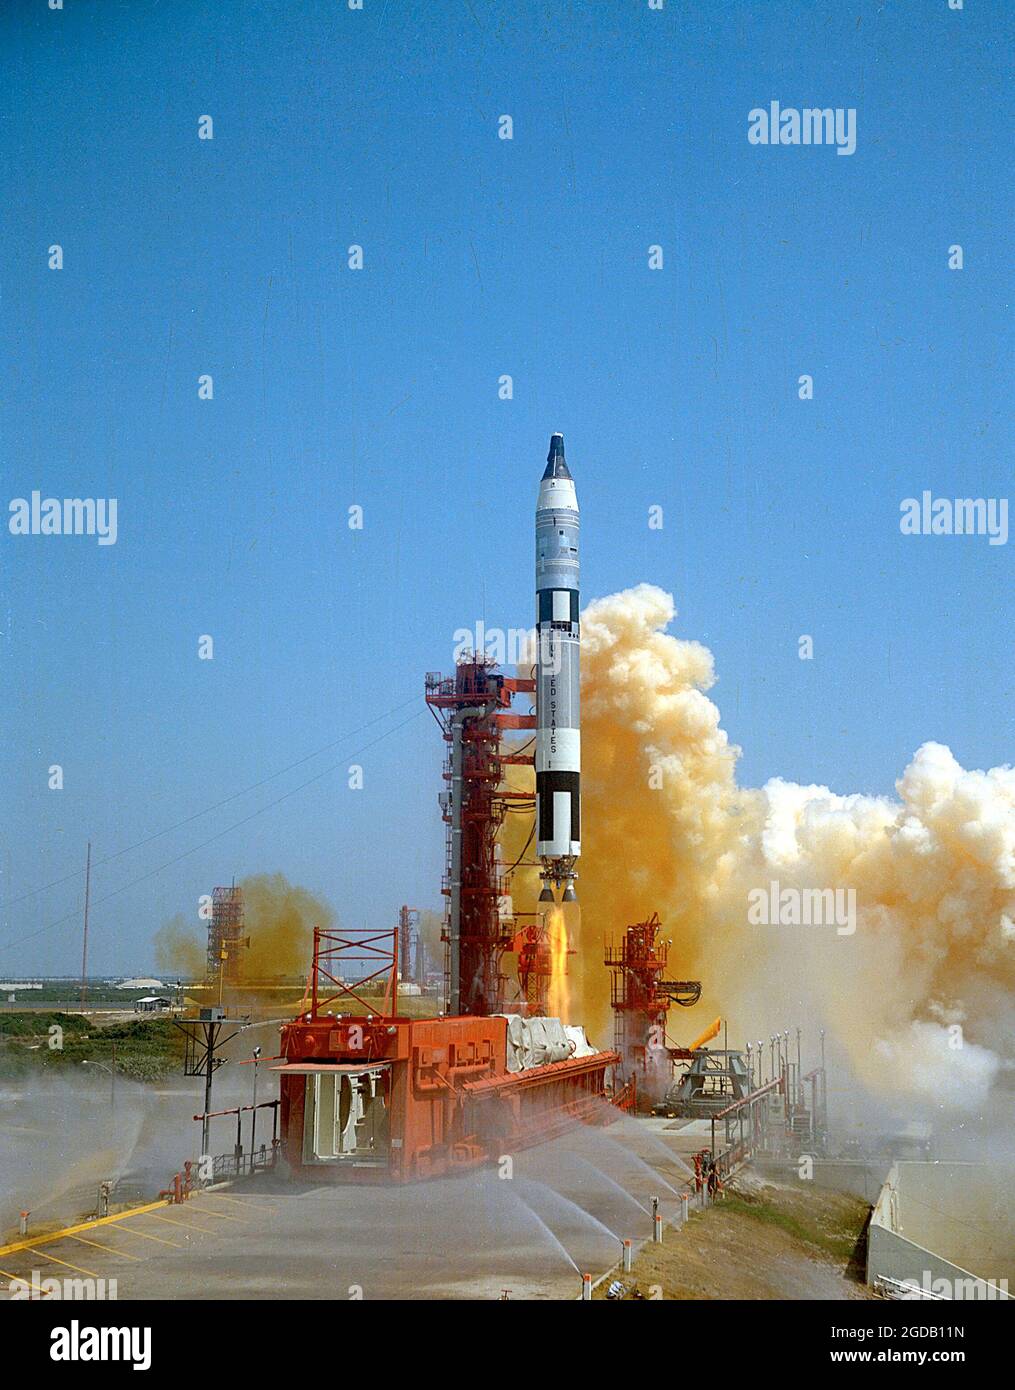 Gemini-Titan 4 (GT-4) lift-off carrying James McDivitt and Ed White for a four-day mission. This flight included the first spacewalk by an American astronaut, performed by Ed White. Stock Photo